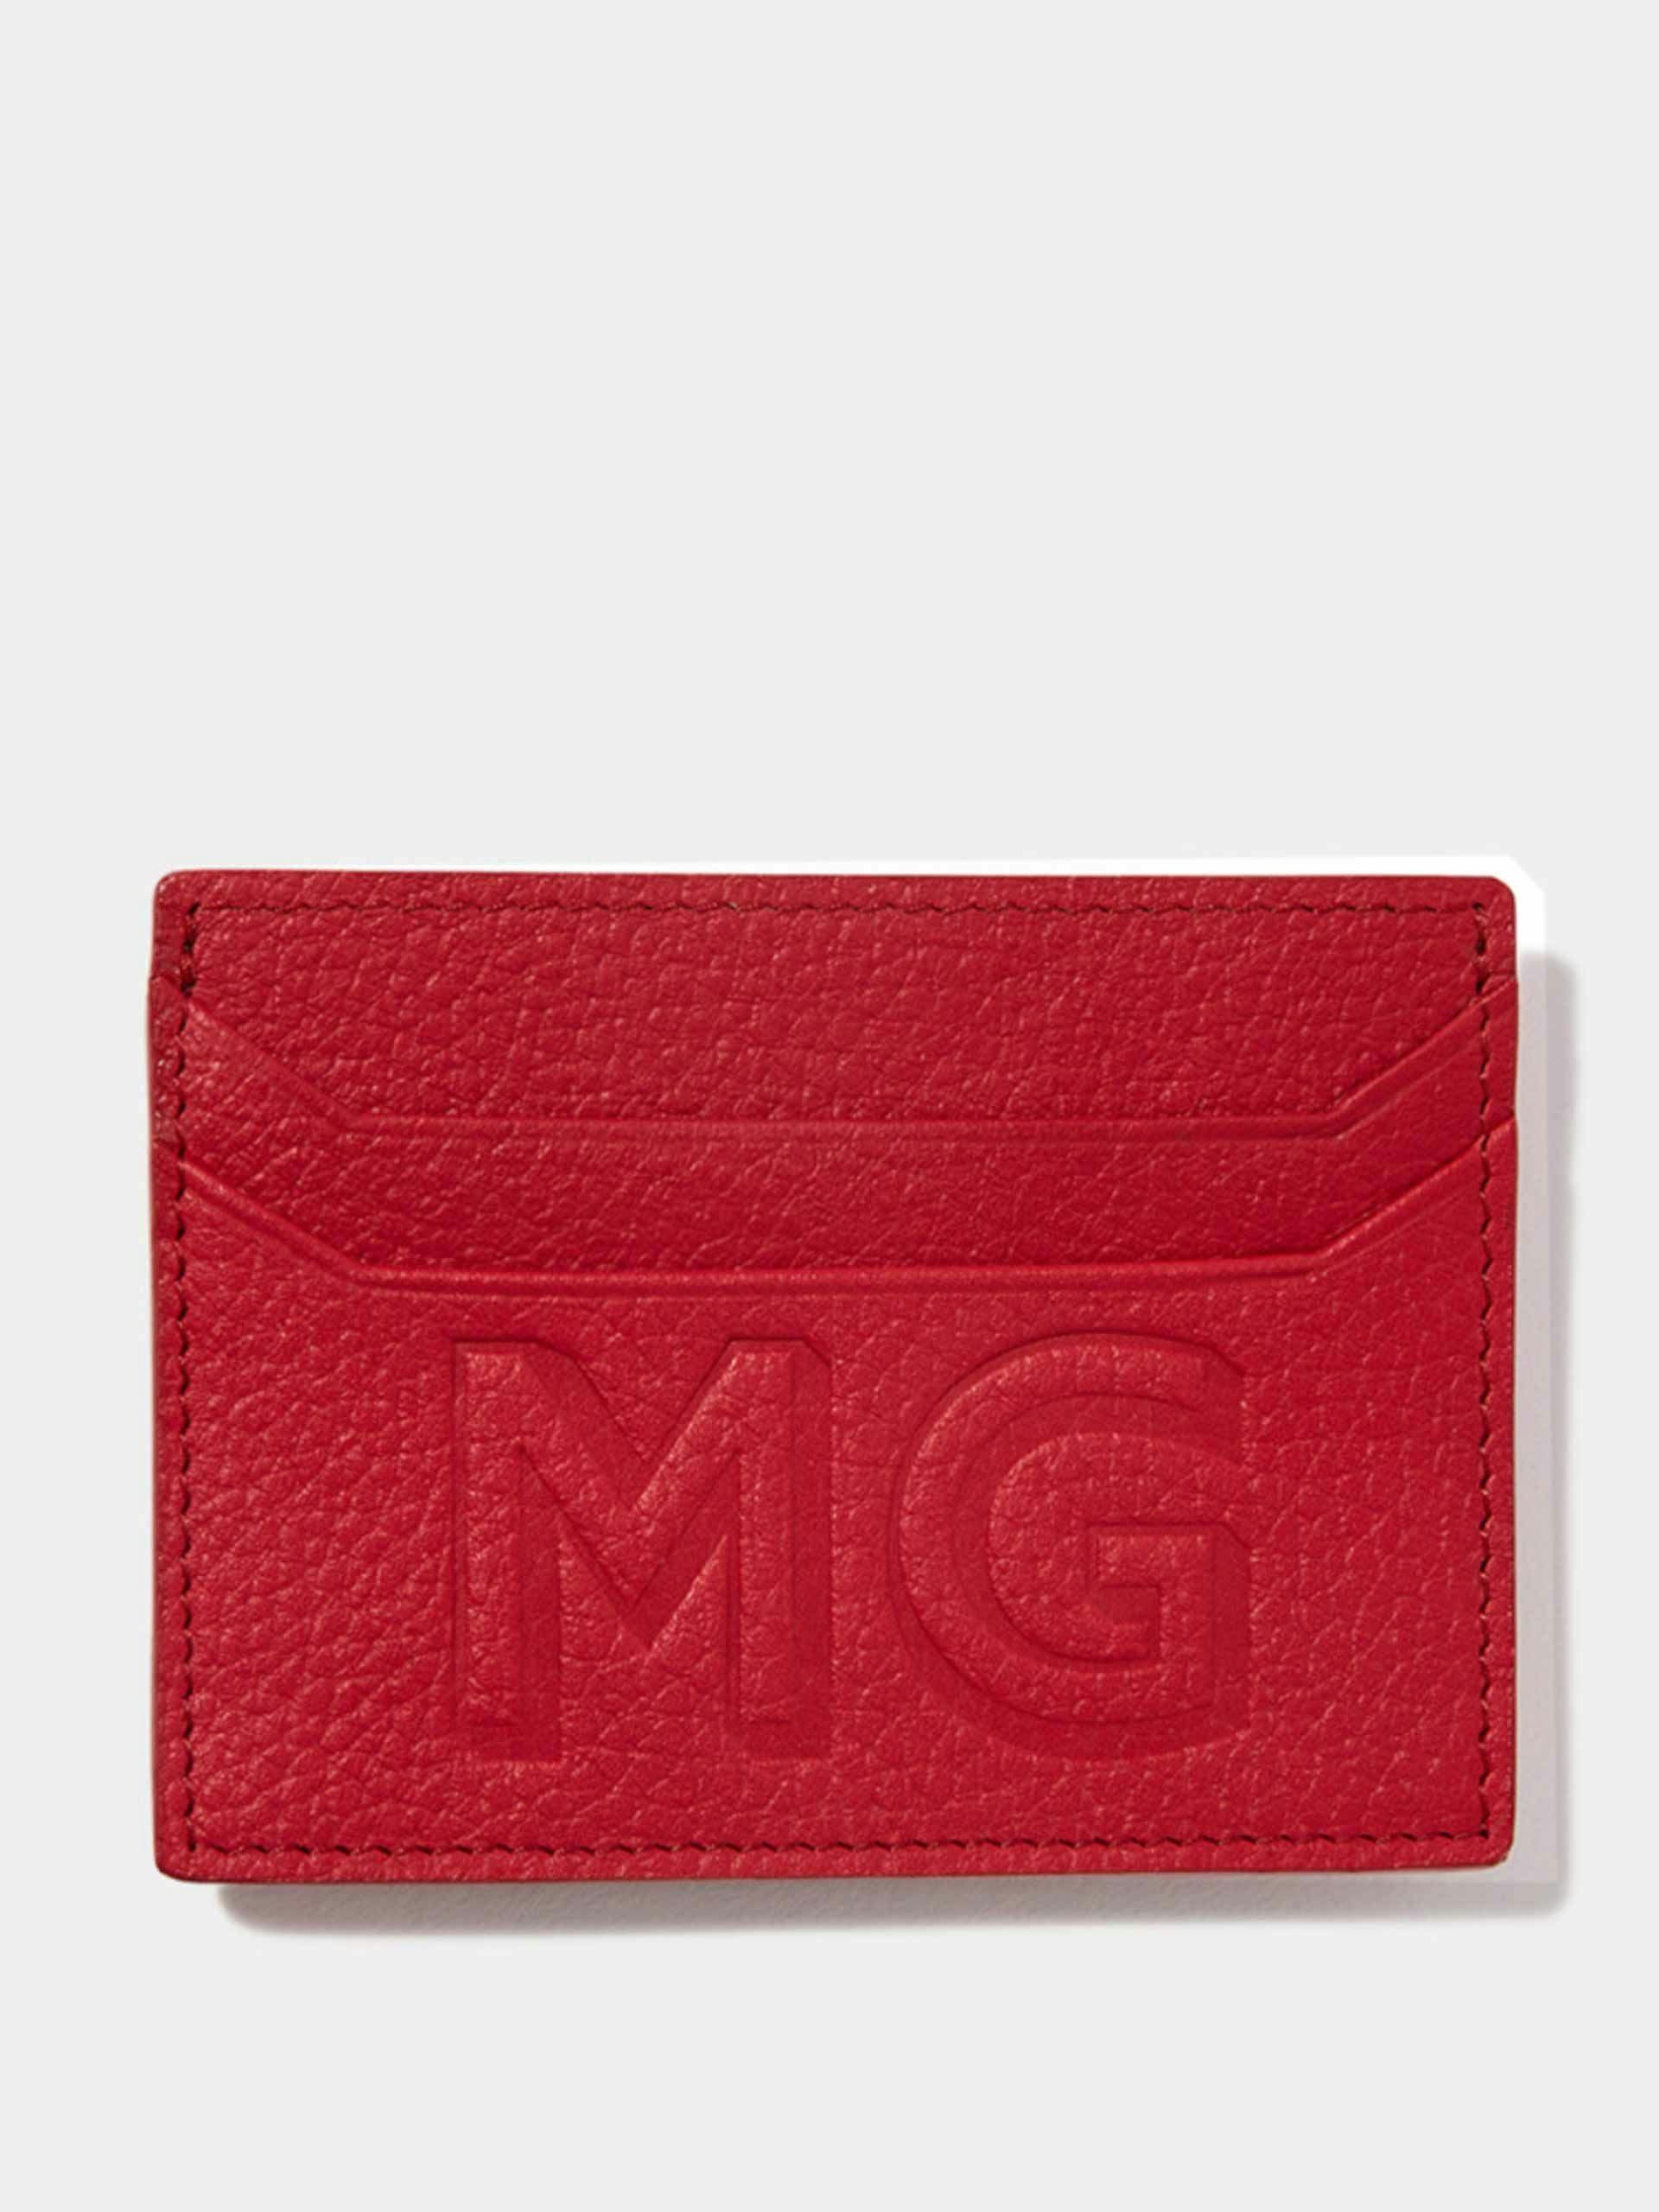 Personalised red leather card holder